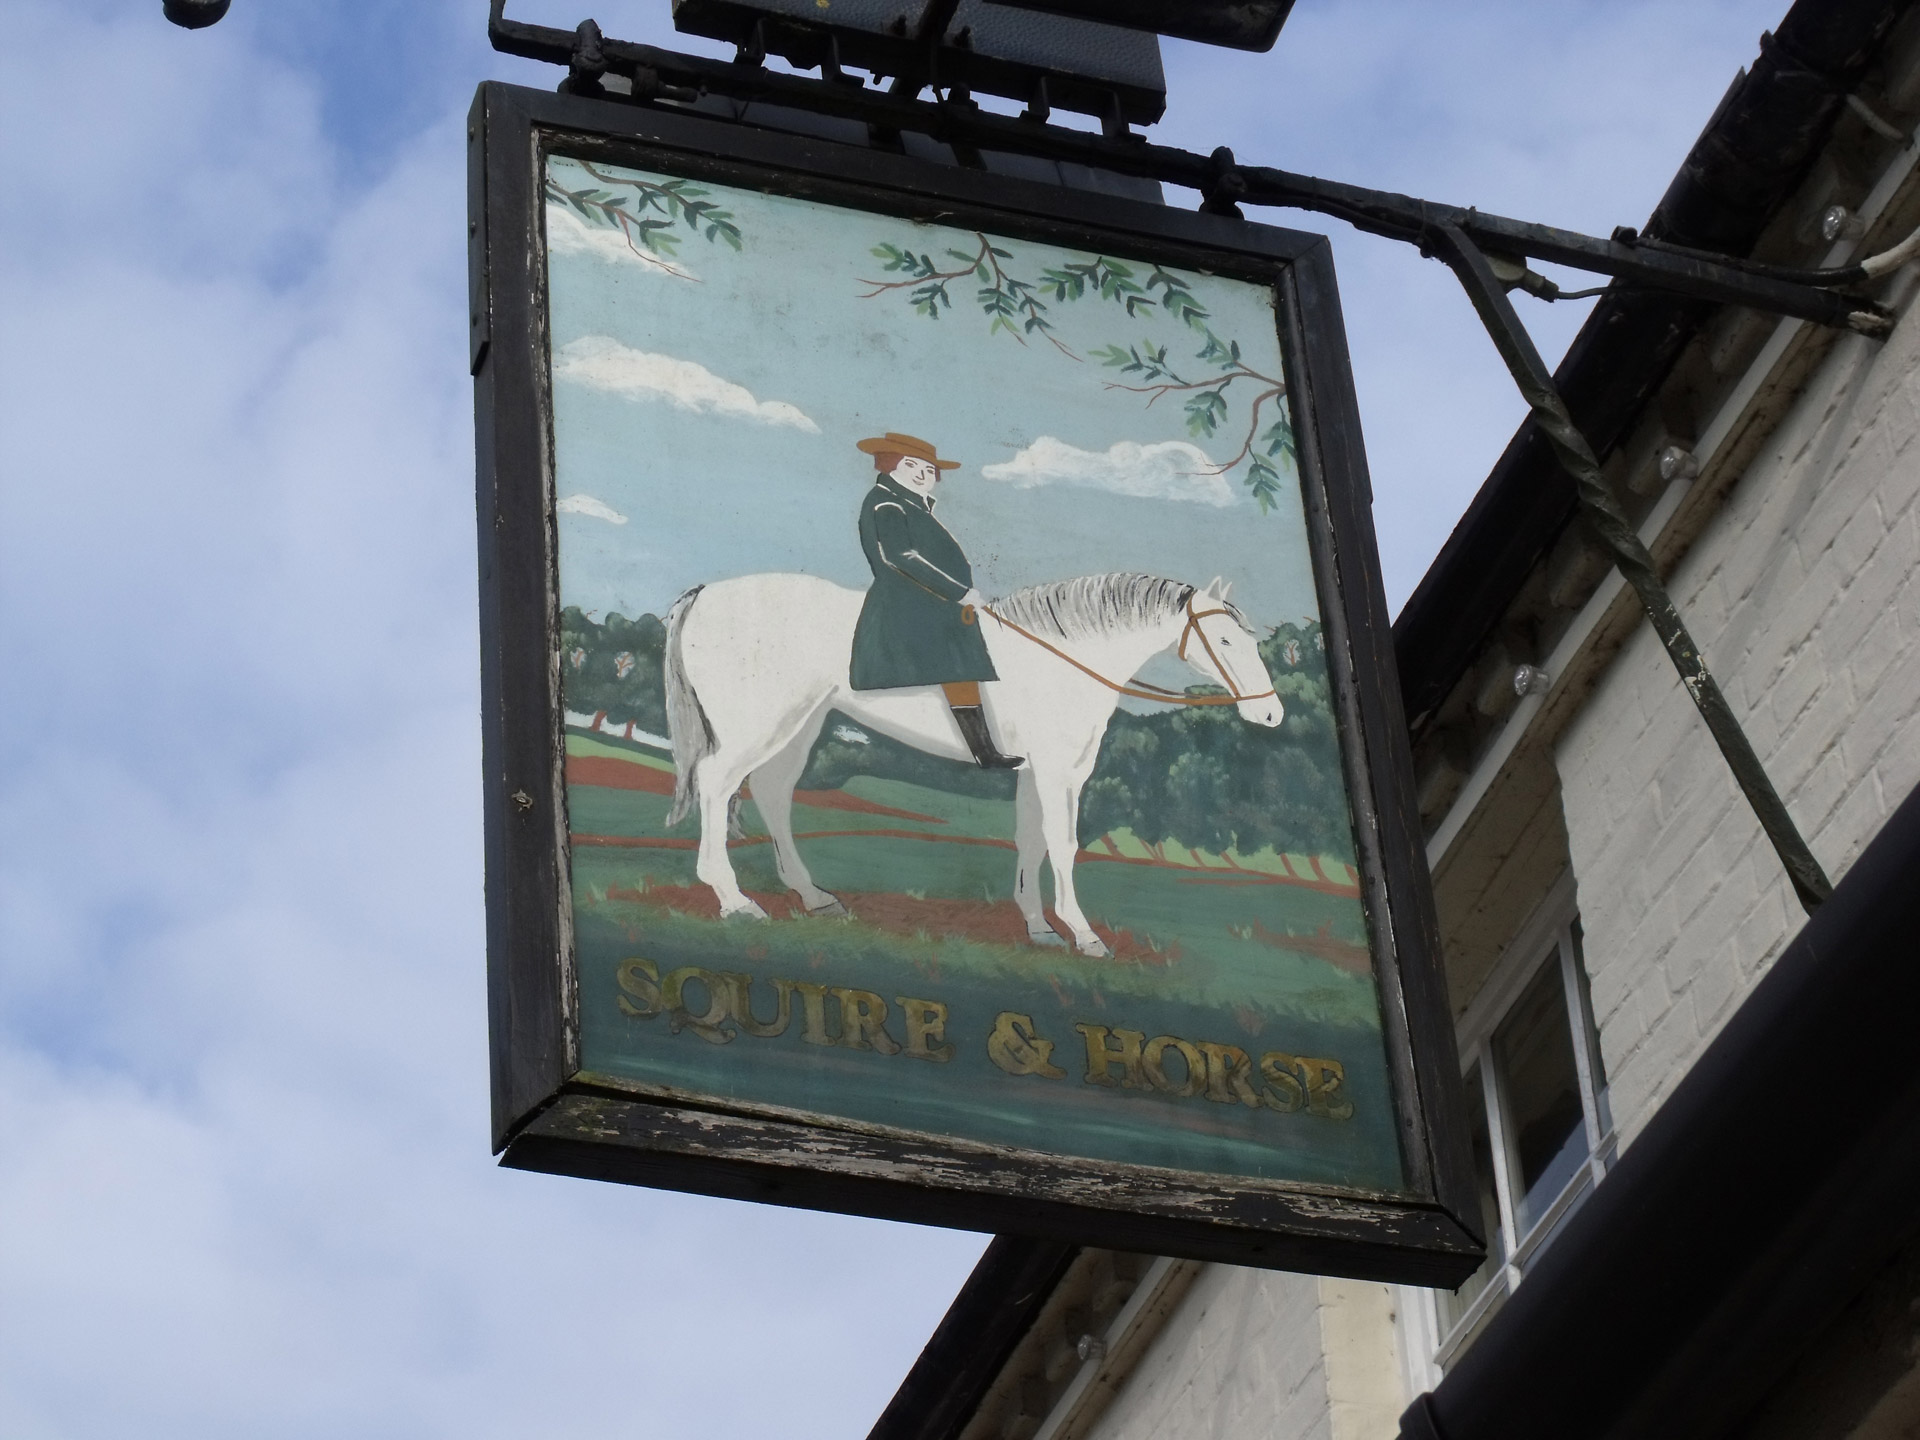 british pub signs squire and horse old pub names free photo